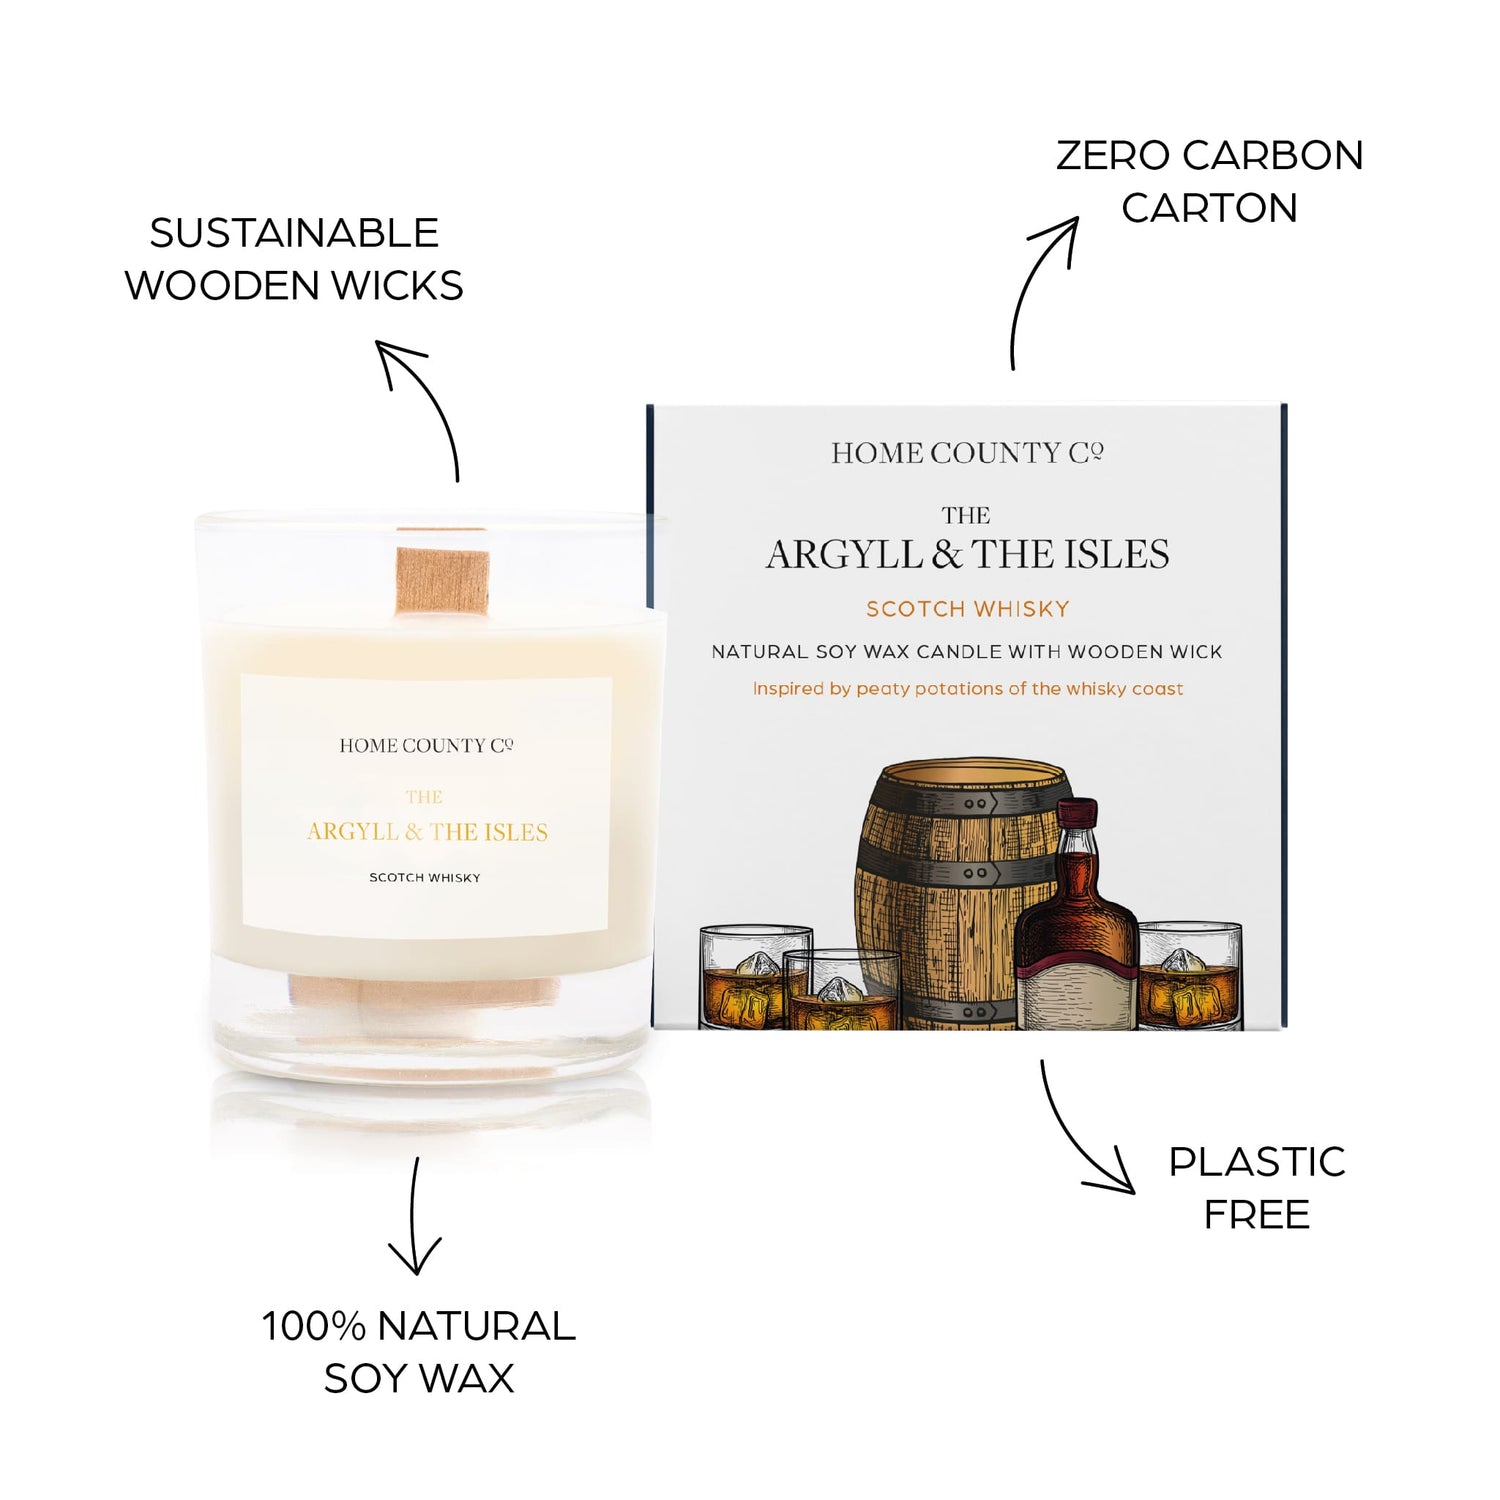 Sustainable candle credentials are shown around the scotch whisky scented candle image - sustainable wooden wicks, zero carbon carton, 100% natural soy wax, plastic free